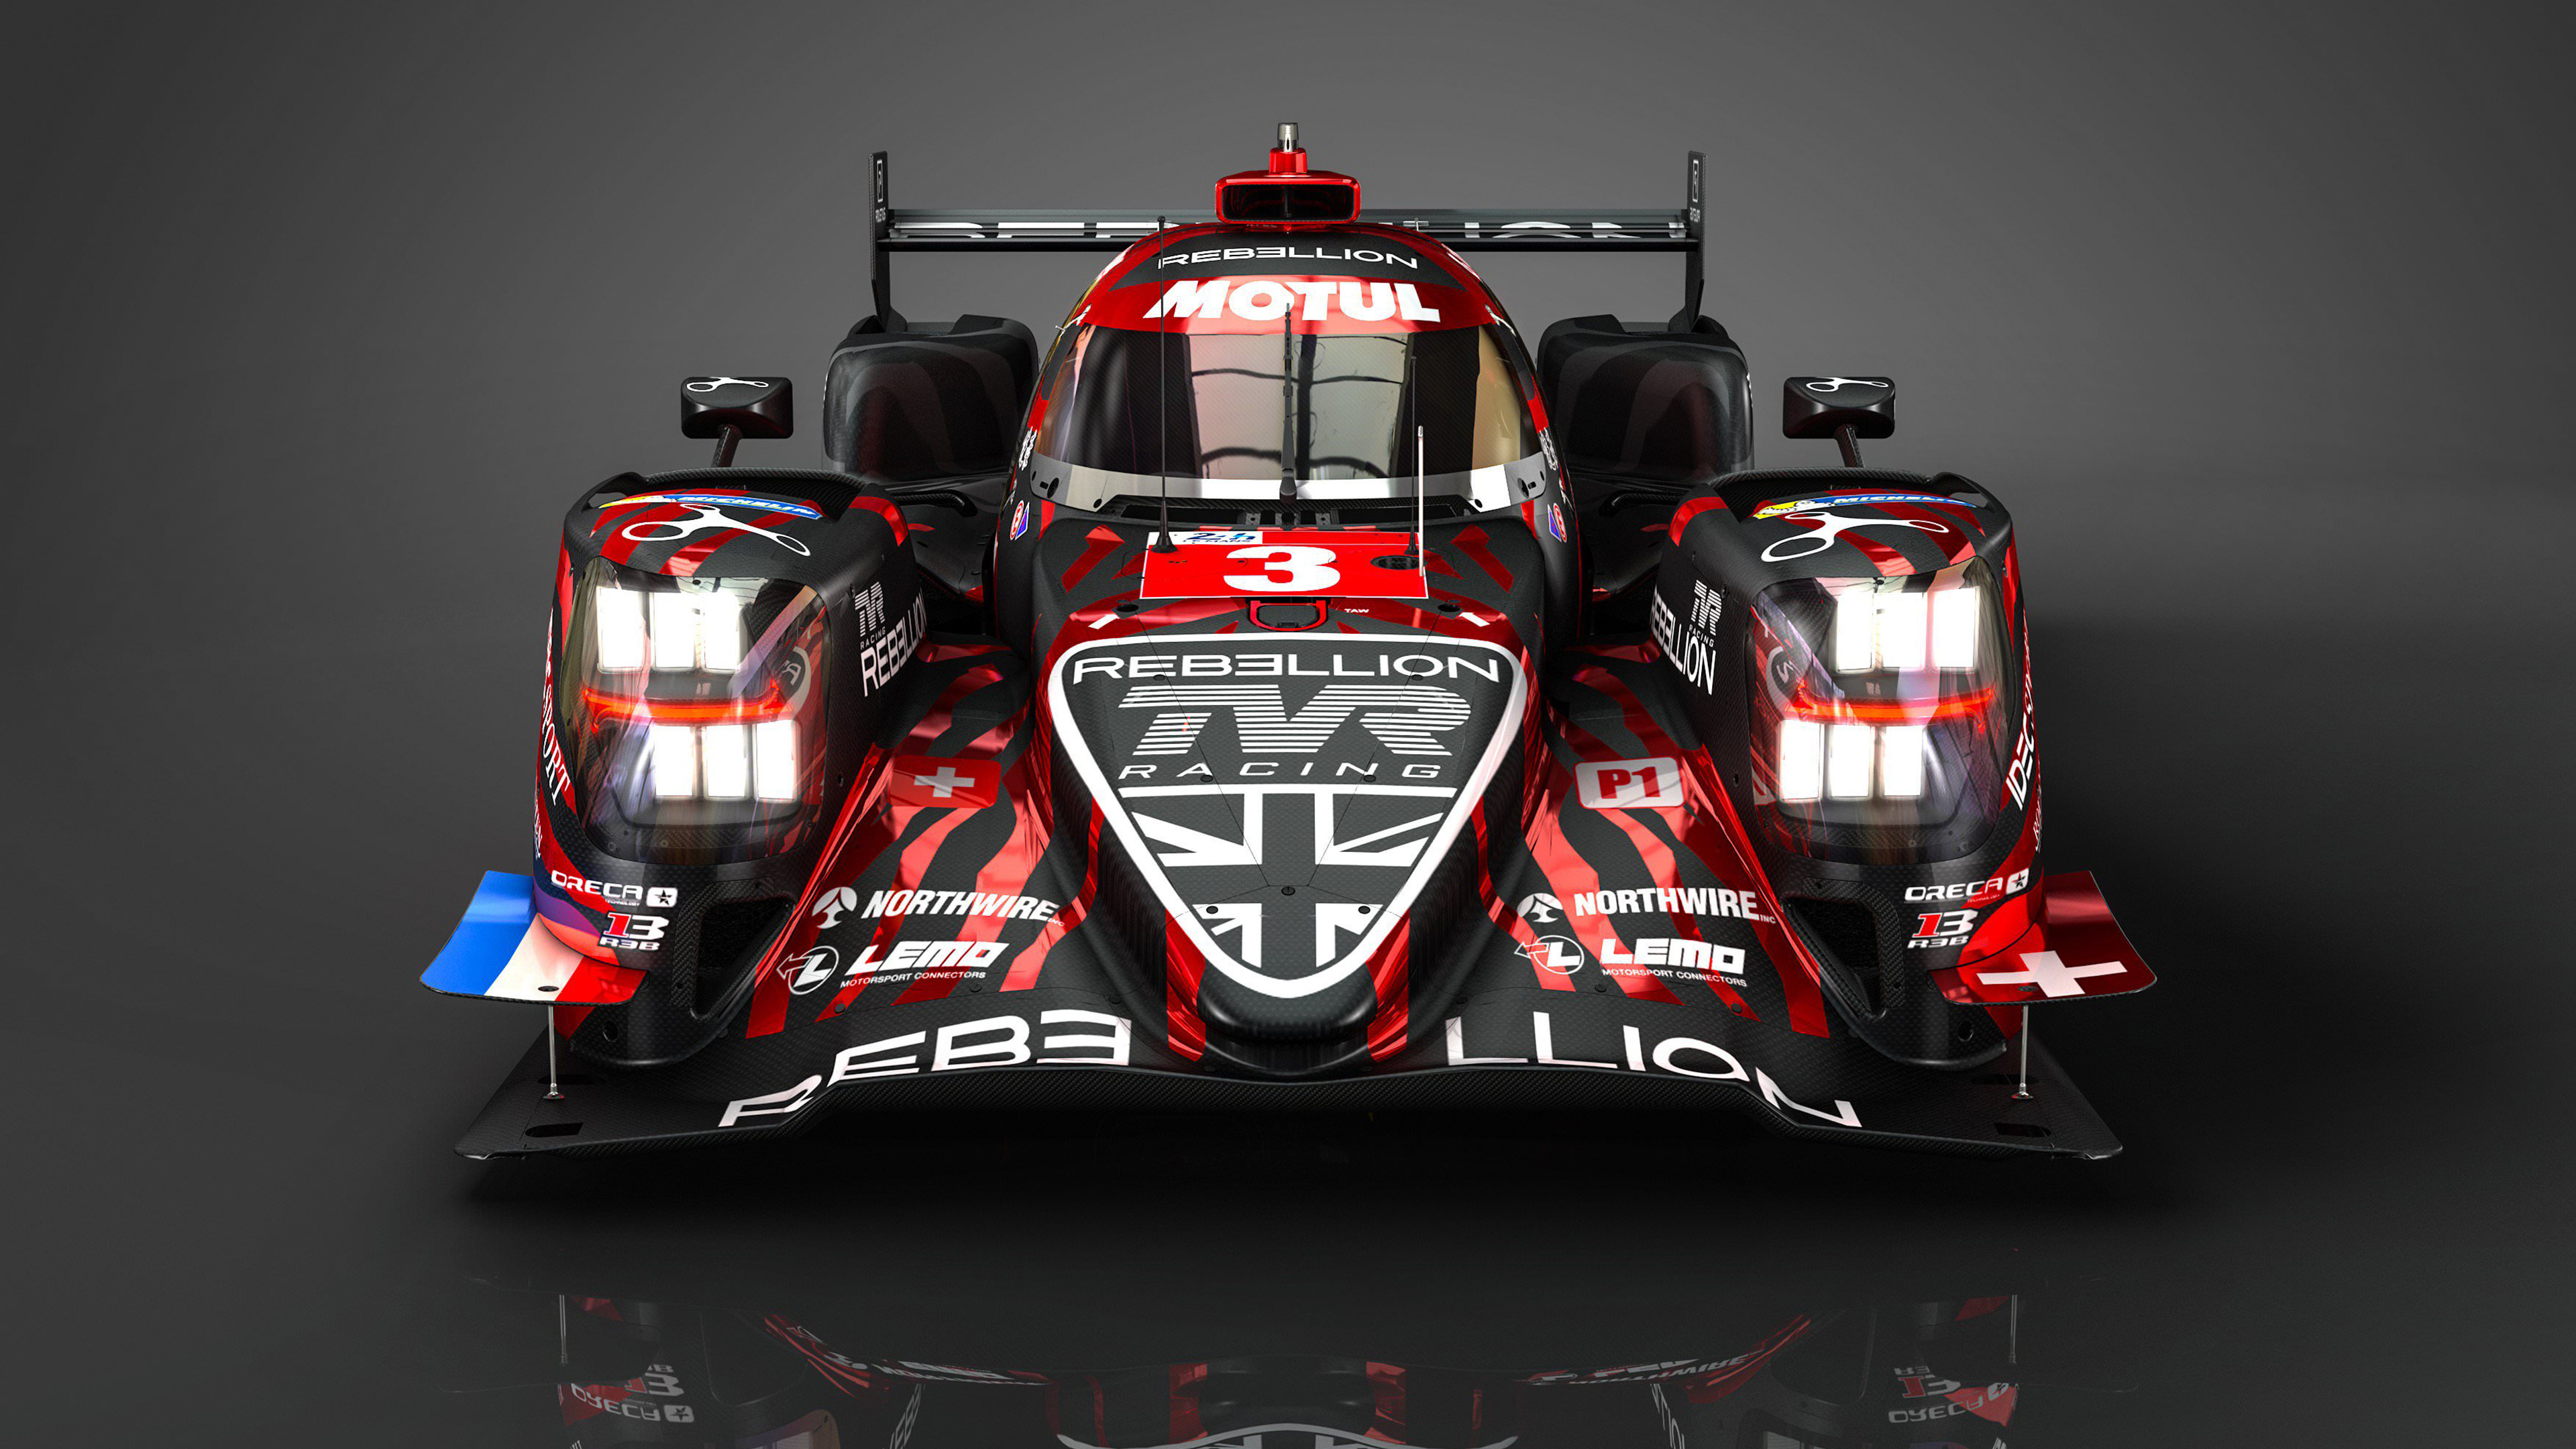 Endurance Racing: Rebellion Racing Team, TVR, Northwire, The Intercontinental Le Mans Cup Season Of 2011, Europe. 3840x2160 4K Wallpaper.